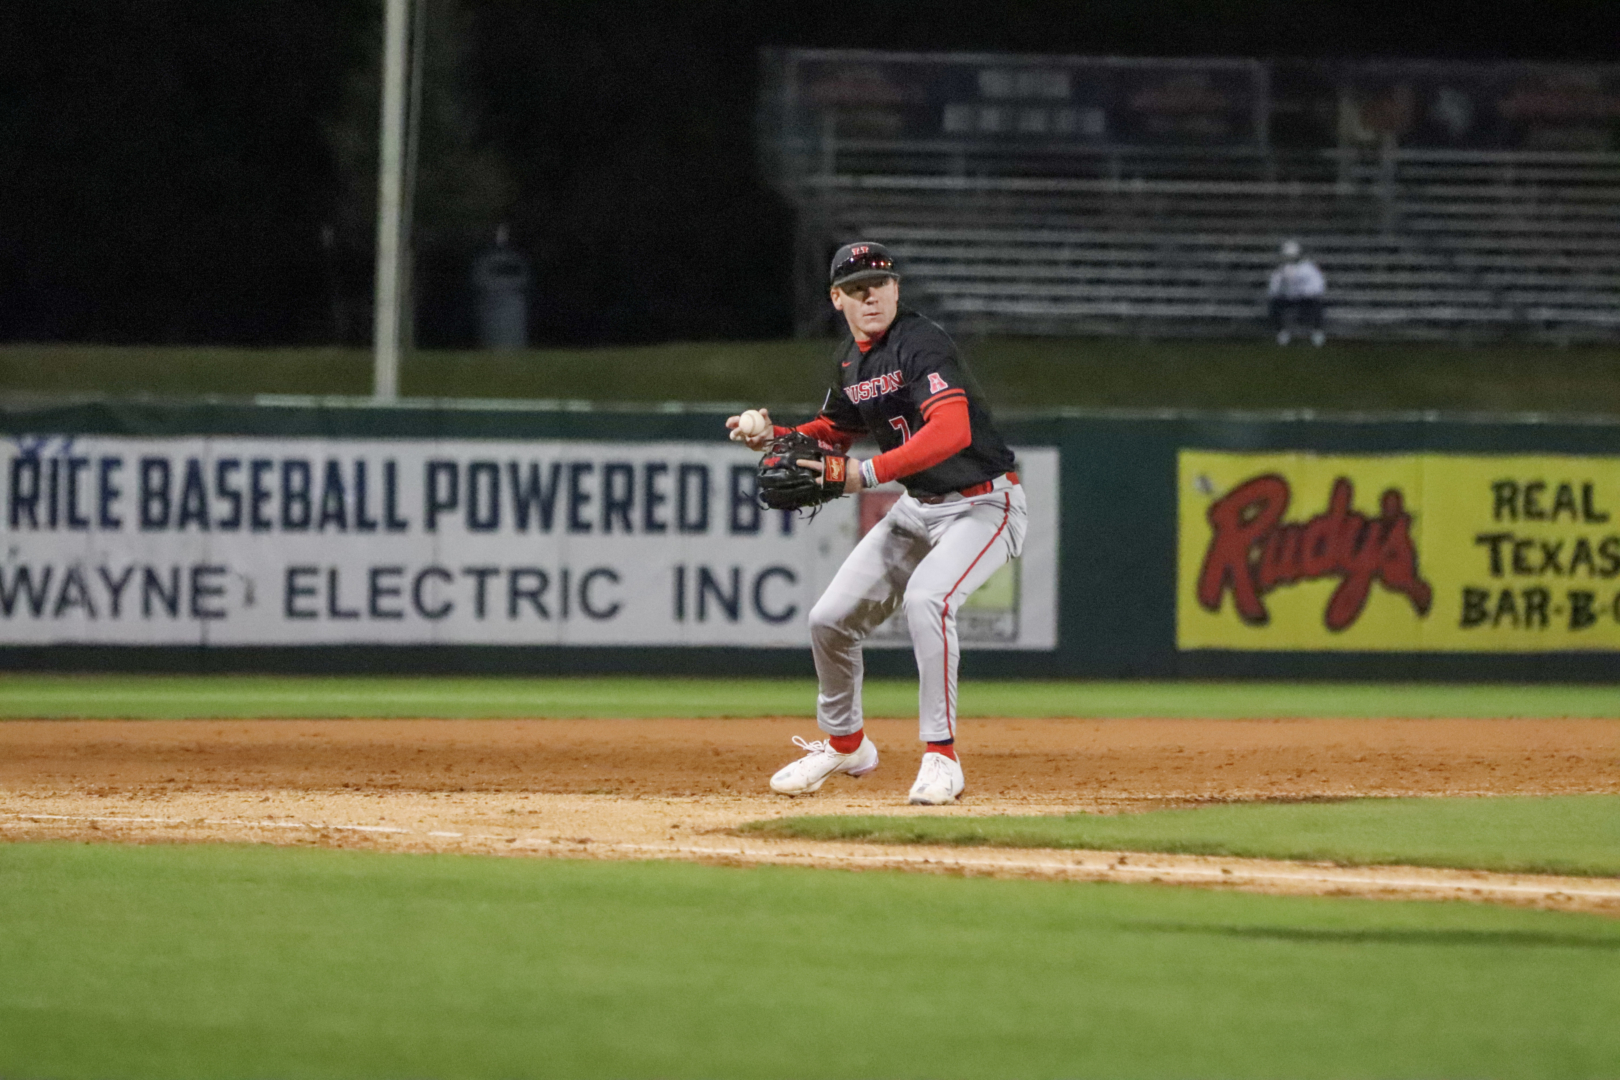 Sophomore third baseman Zach Arnold guns down a runner at home in the third inning of UH baseball's win over Rice on Tuesday night at Reckling Park. | James Mueller/The Cougar